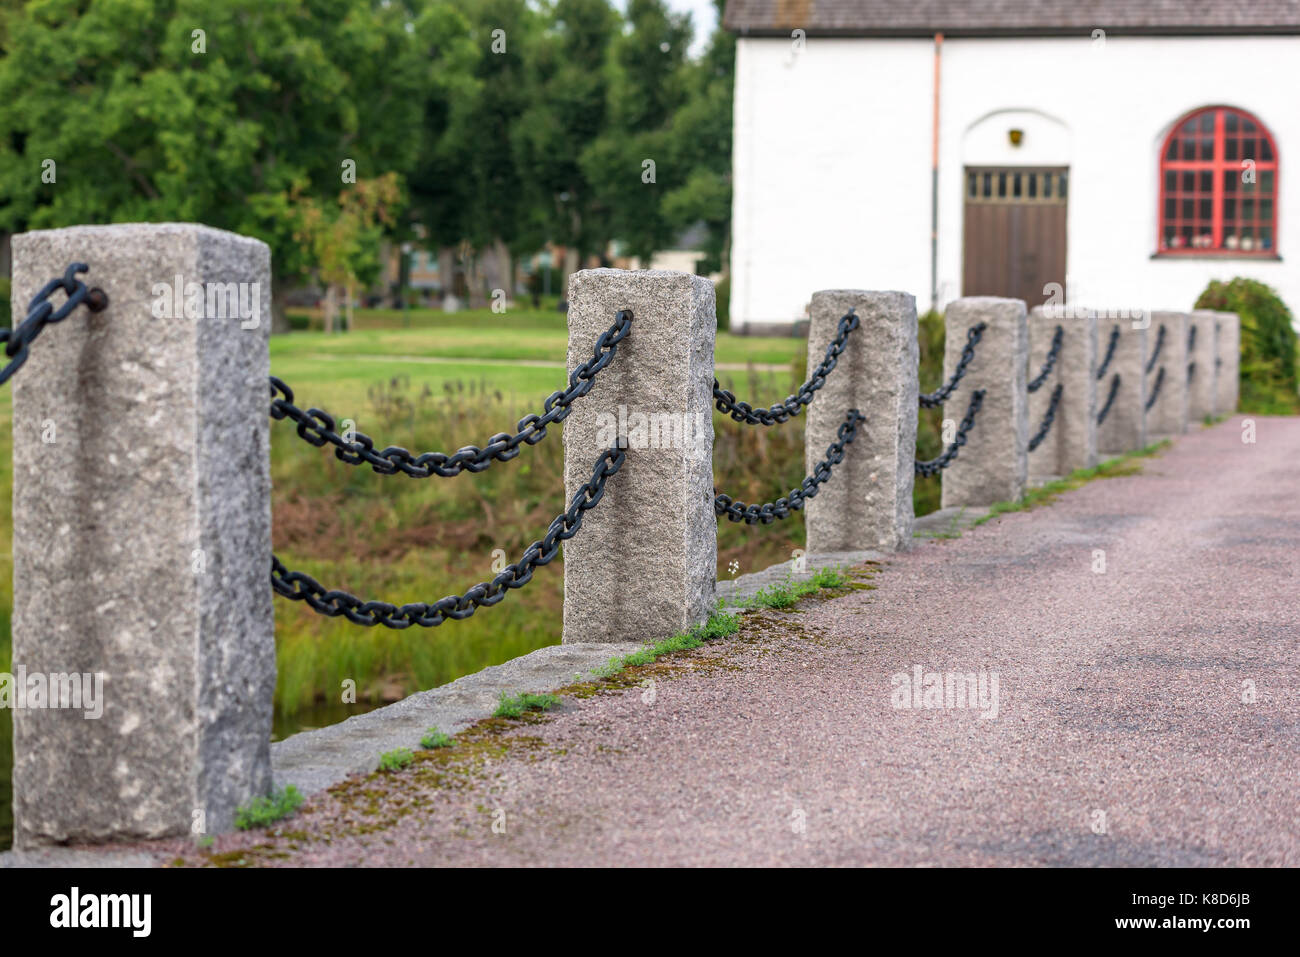 Stone pillars and iron chain as railing along road. Church in background. Stock Photo